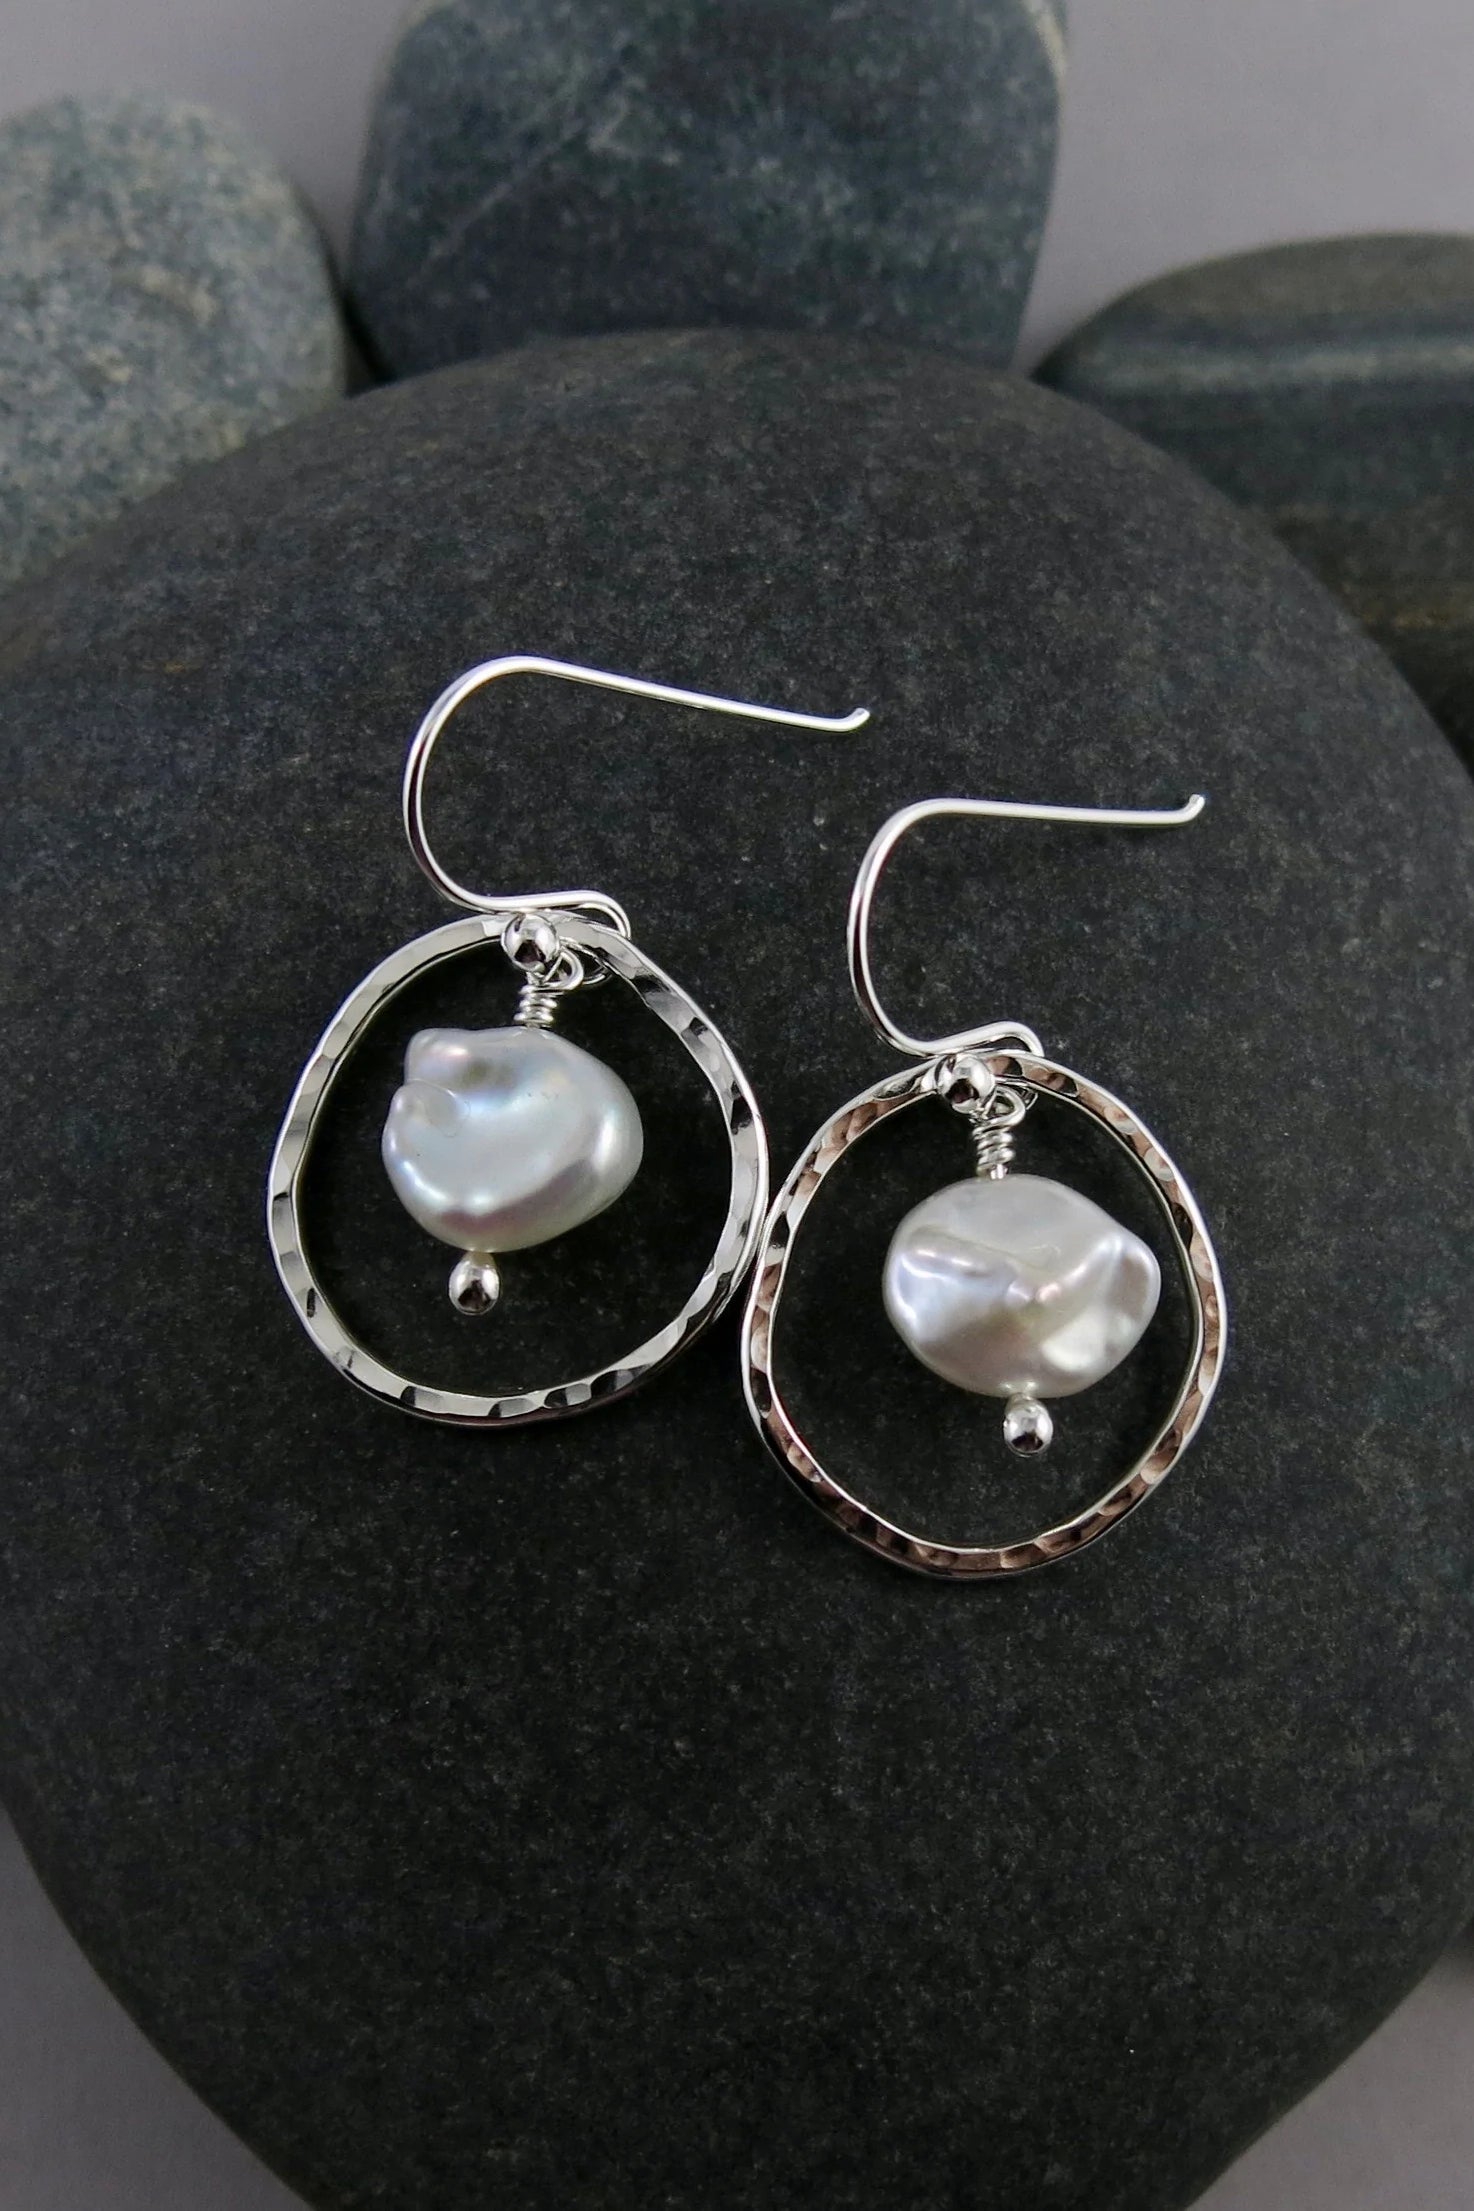 Organic Keshi Pearl Earrings in Sterling Silver by Mikel Grant, made in Sechelt BC